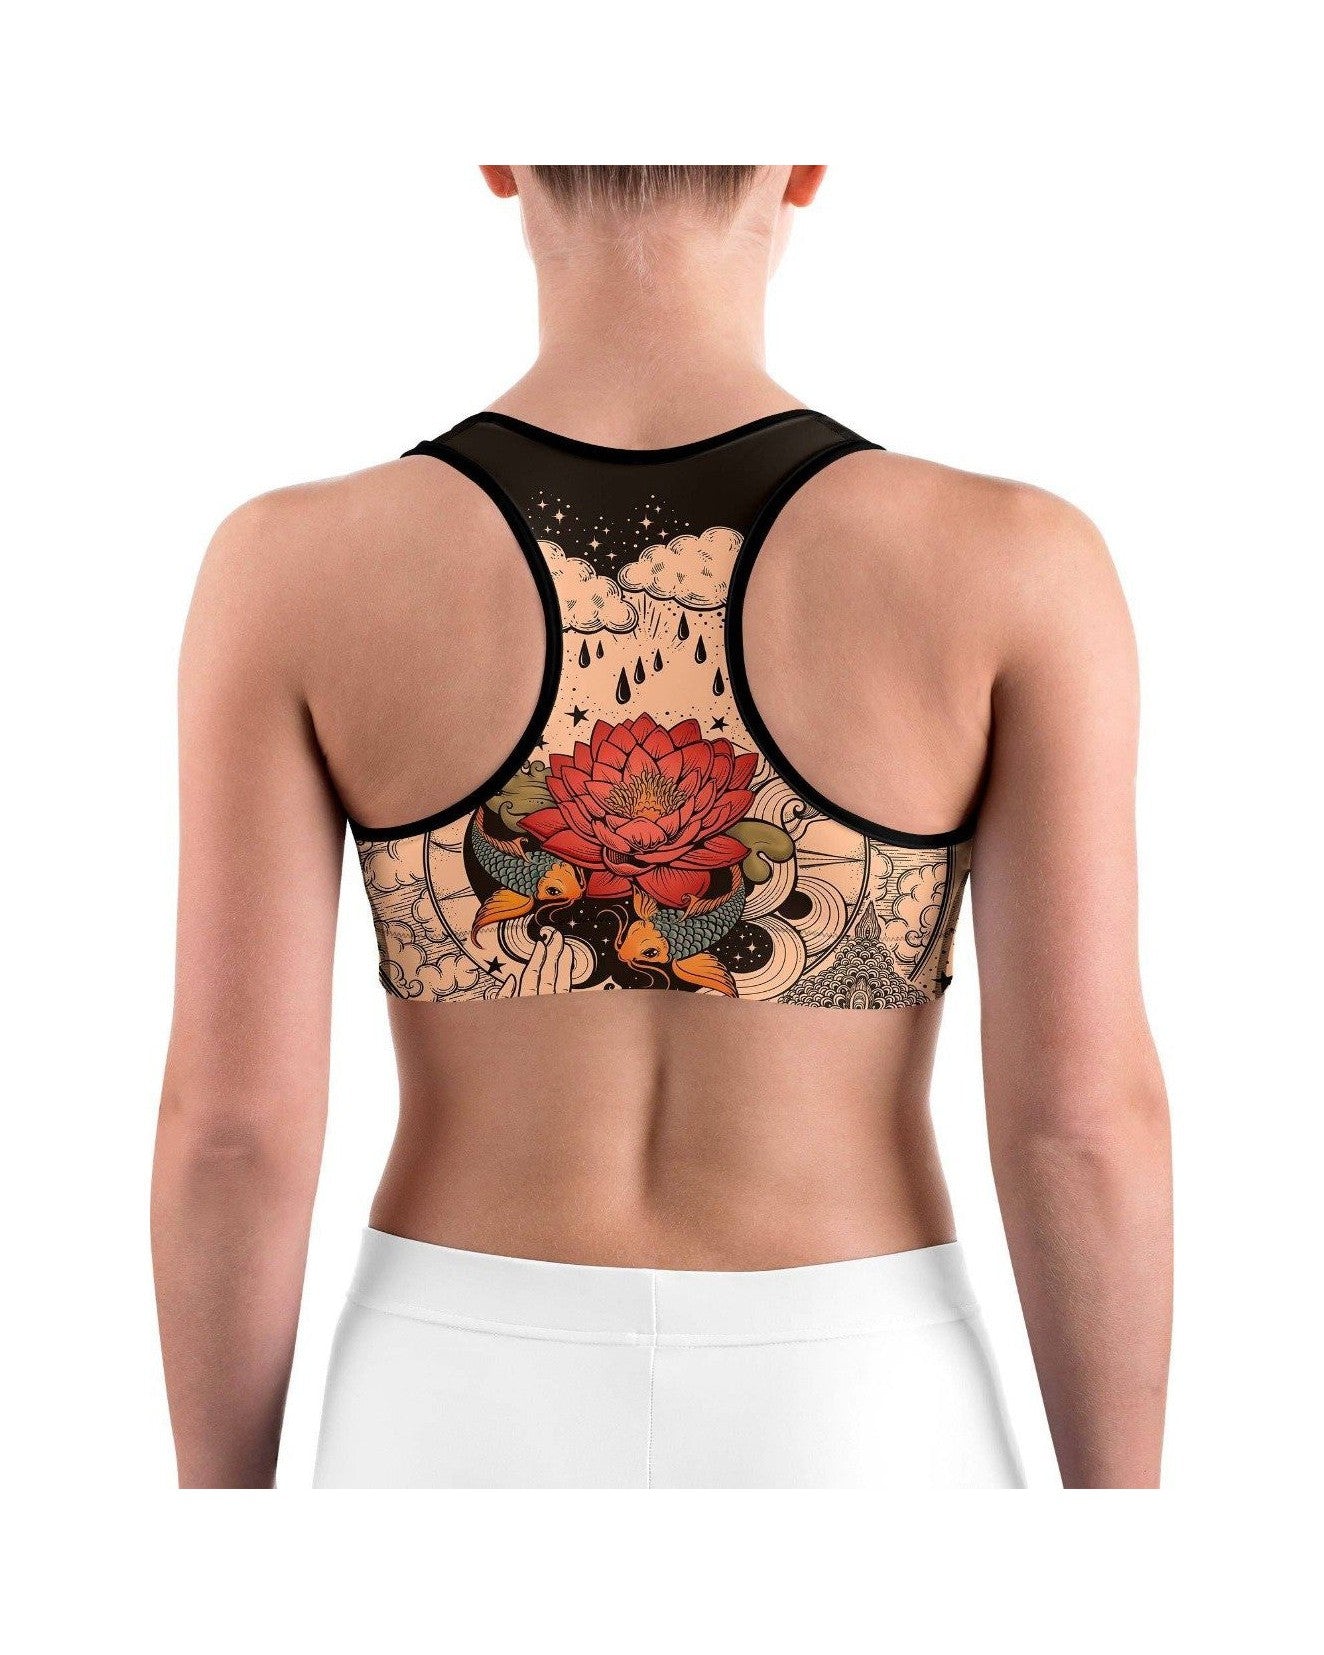 Sports Bra Buying Guide - Norks Sports Bras